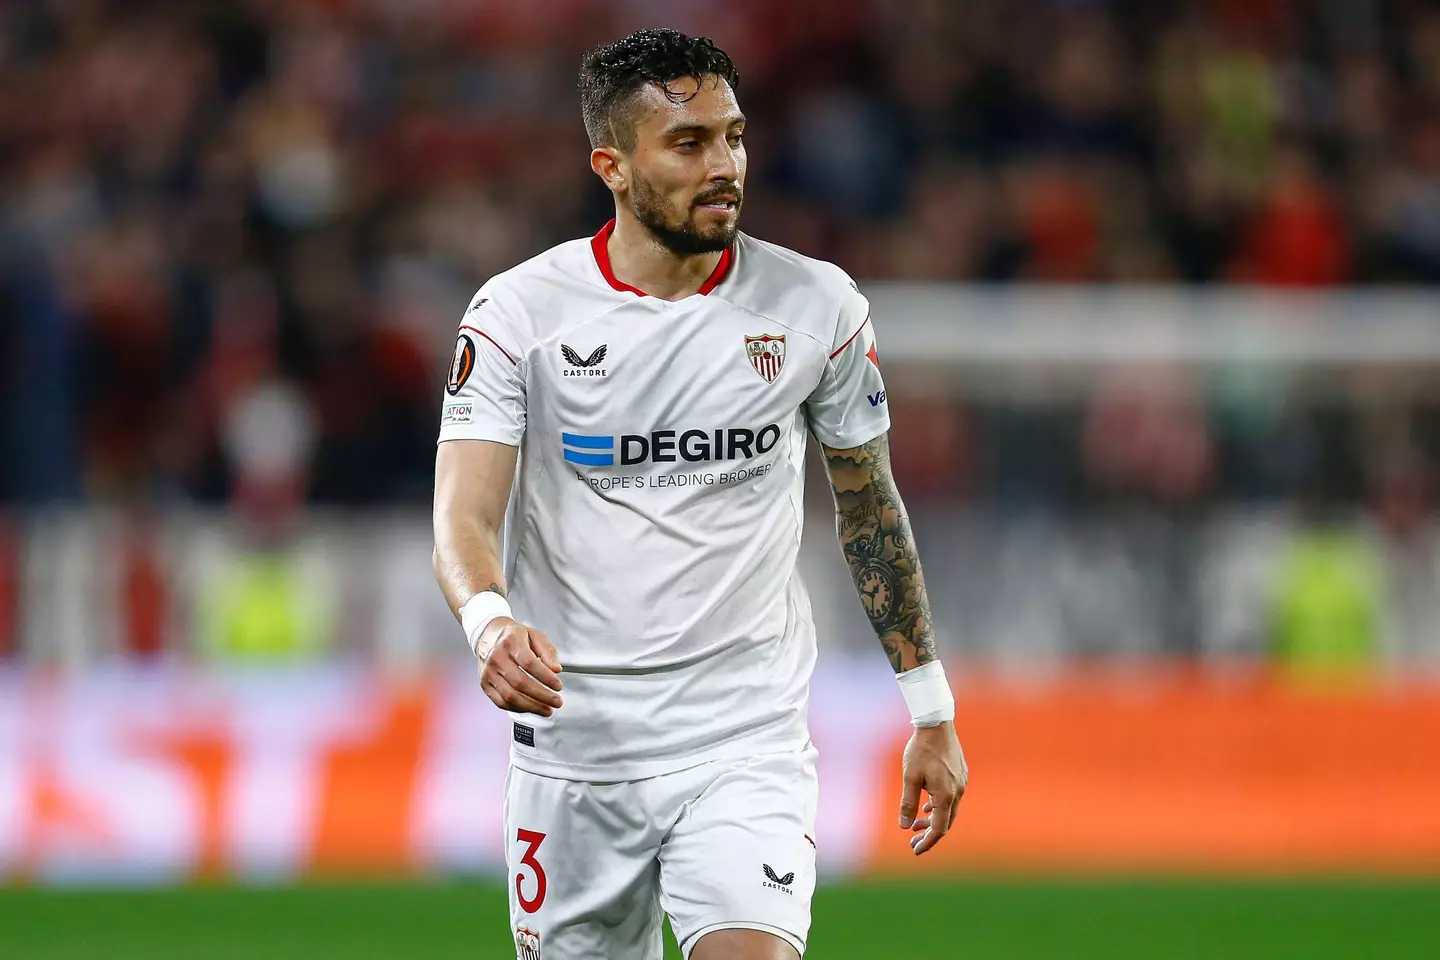 Telles playing for Sevilla in the Europa League. Image: Alamy